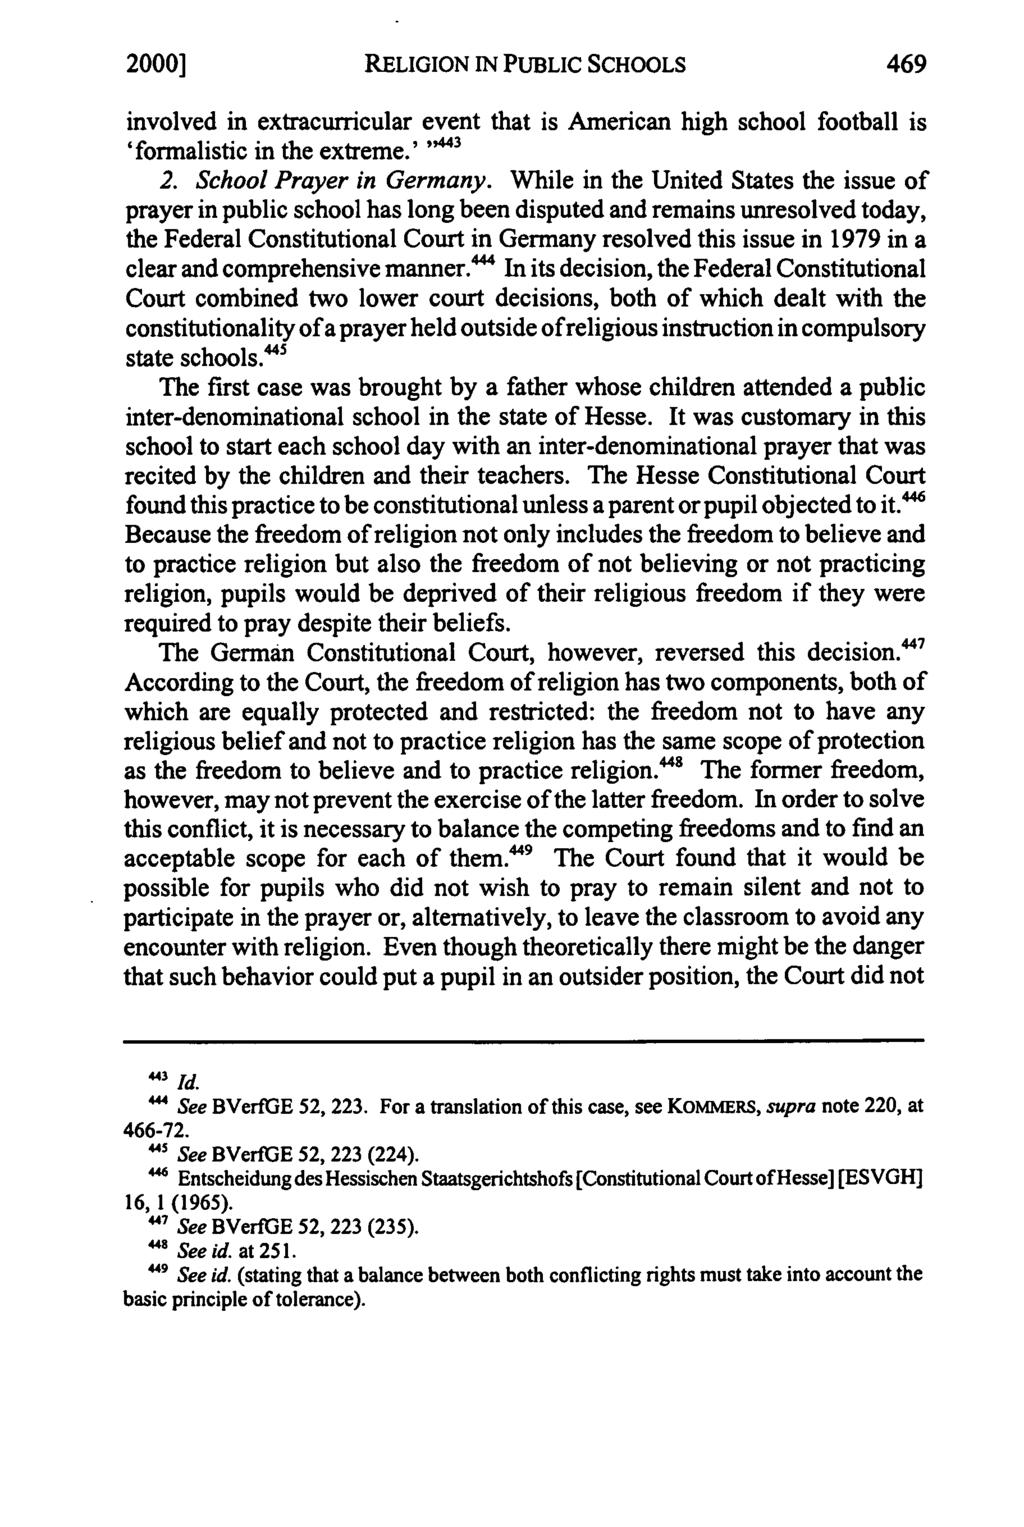 2000] RELIGION IN PUBLIC SCHOOLS 469 involved in extracurricular event that is American high school football is 'formalistic in the extreme.',"3 2. School Prayer in Germany.